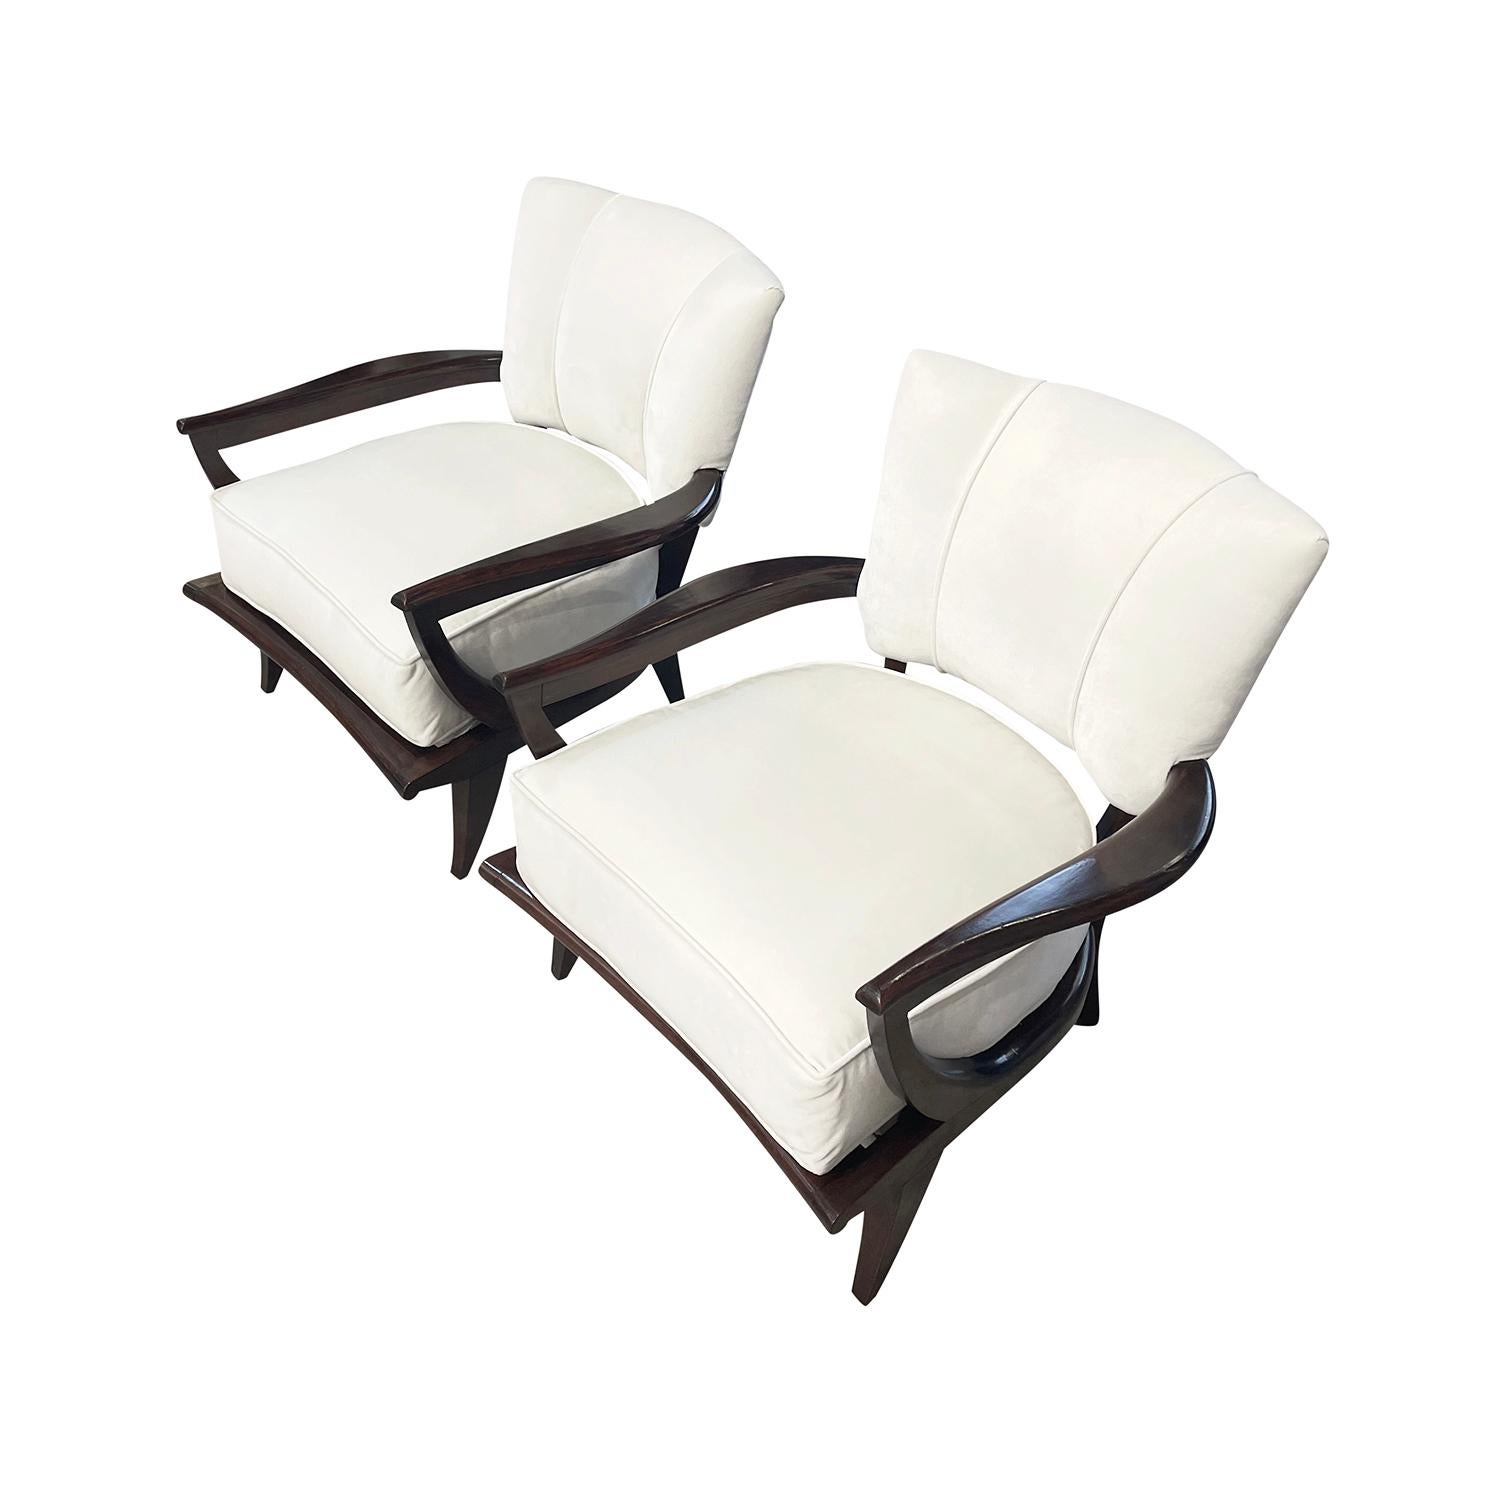 Polished 20th Century French Pair of Beech Armchairs by Etienne-Henri Martin & Steiner For Sale